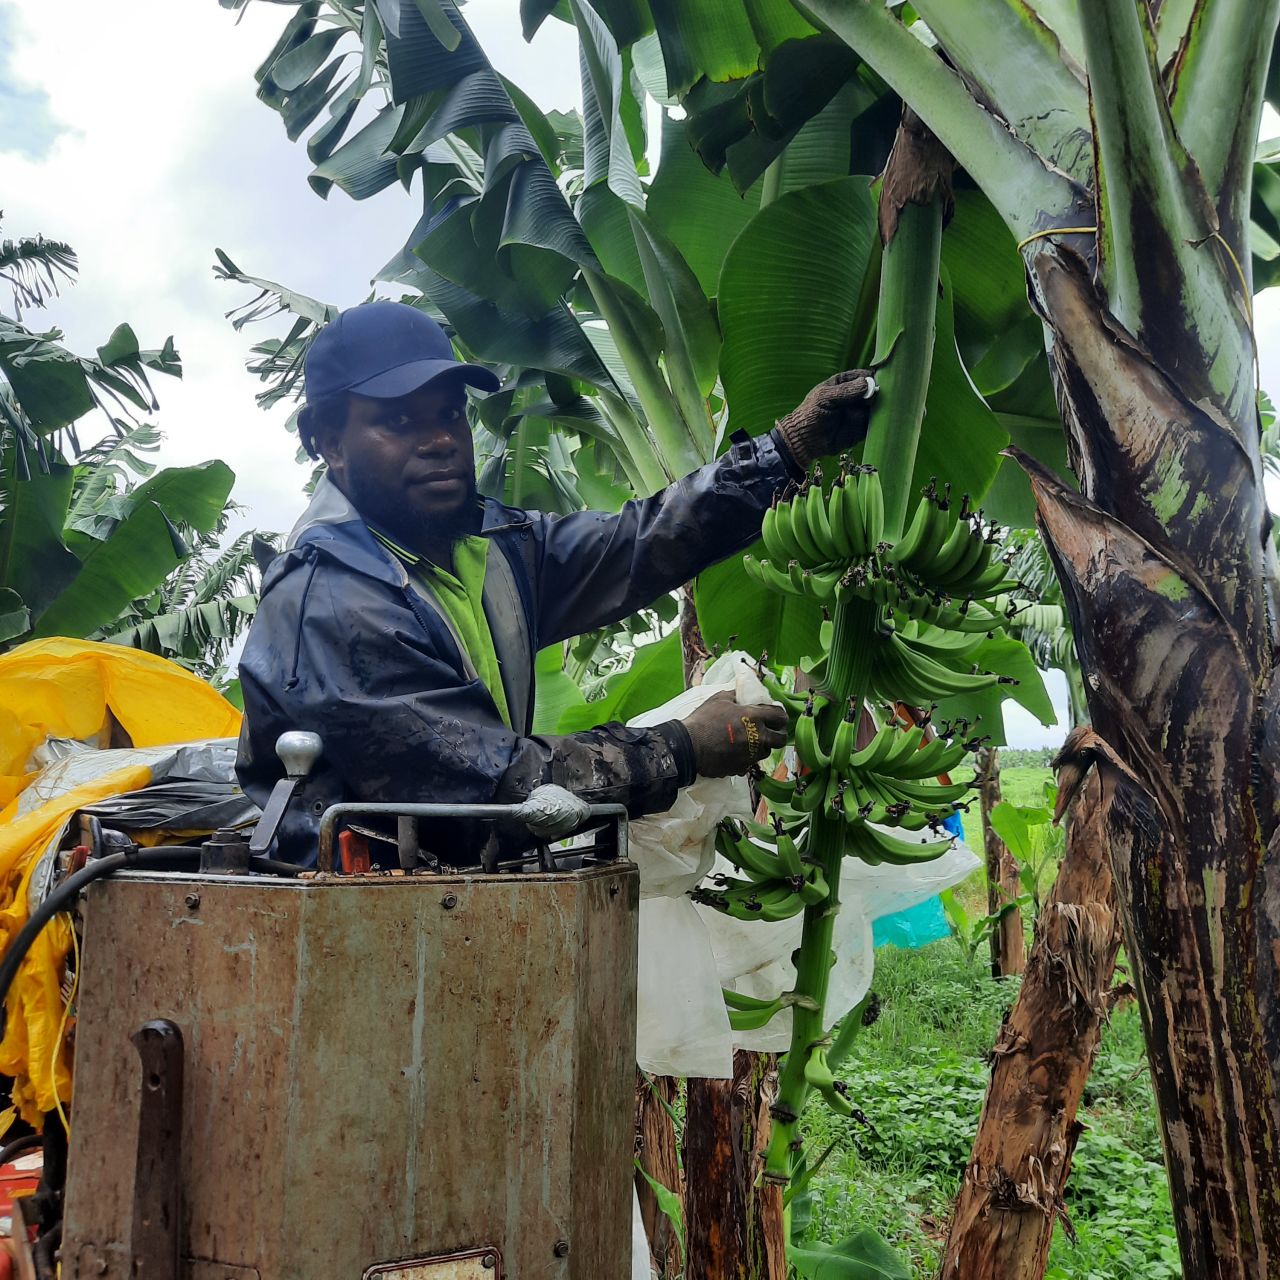 Banana bunches are GPS tagged and harvested part of the innovation project led by Farmacist. Credit: Farmacist.